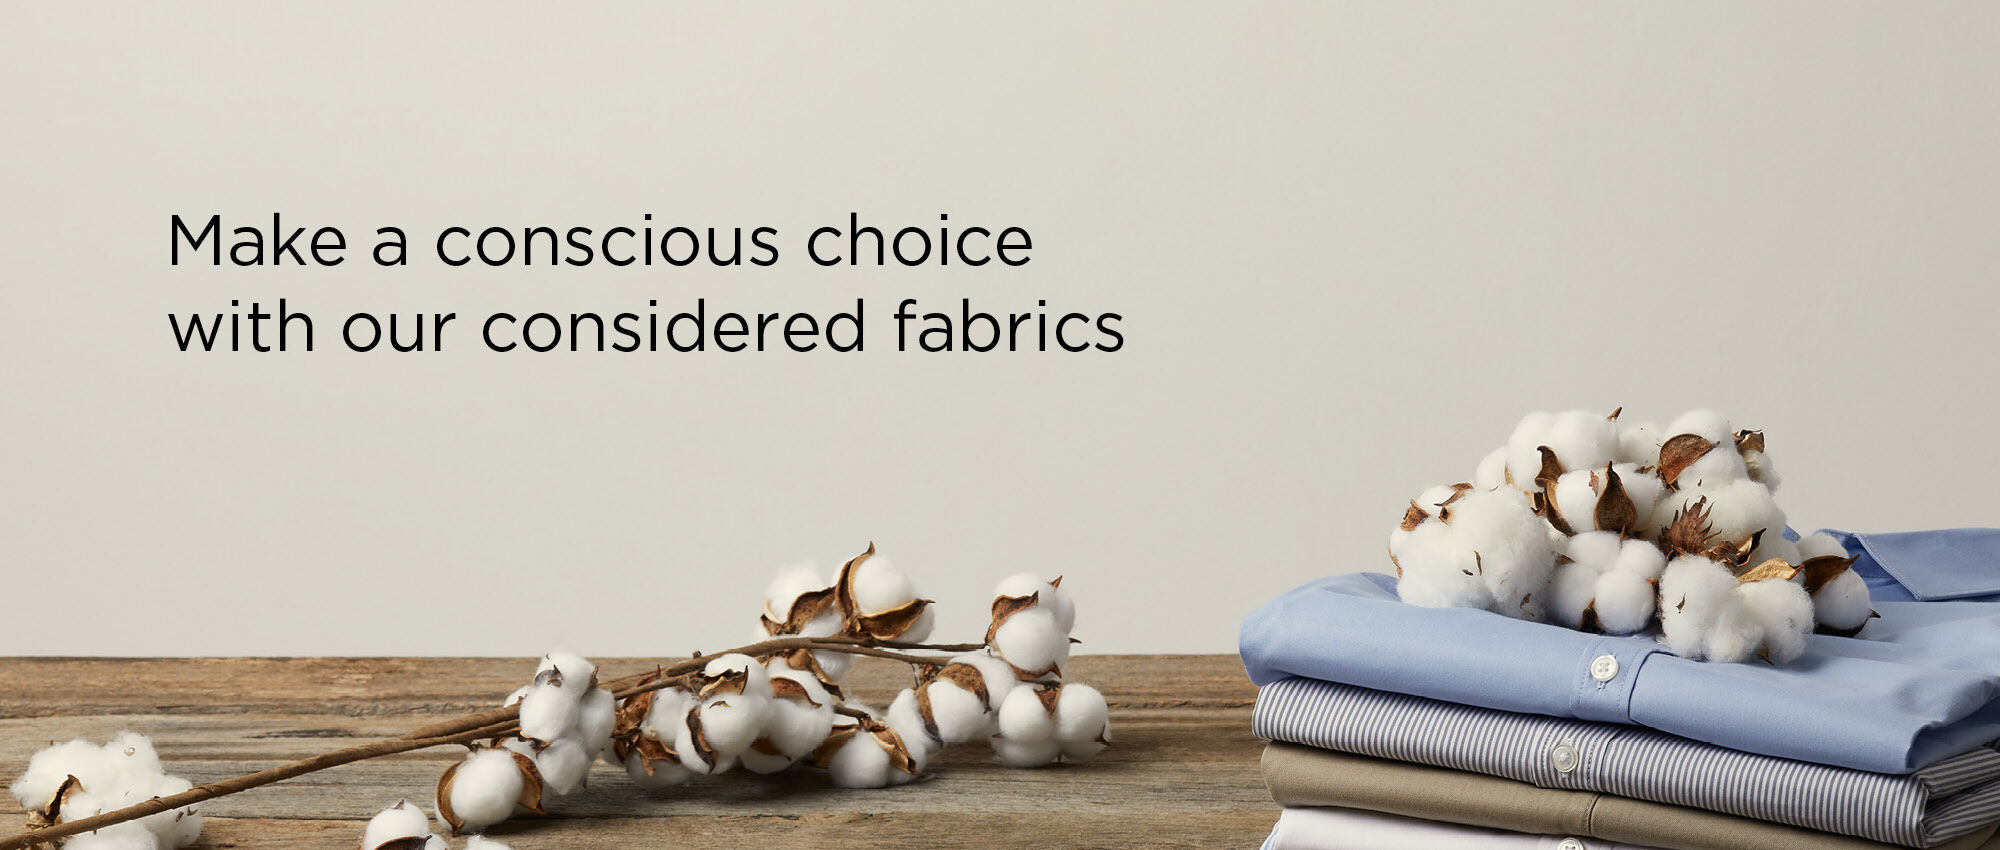 Make a conscious choice with our considered fabrics